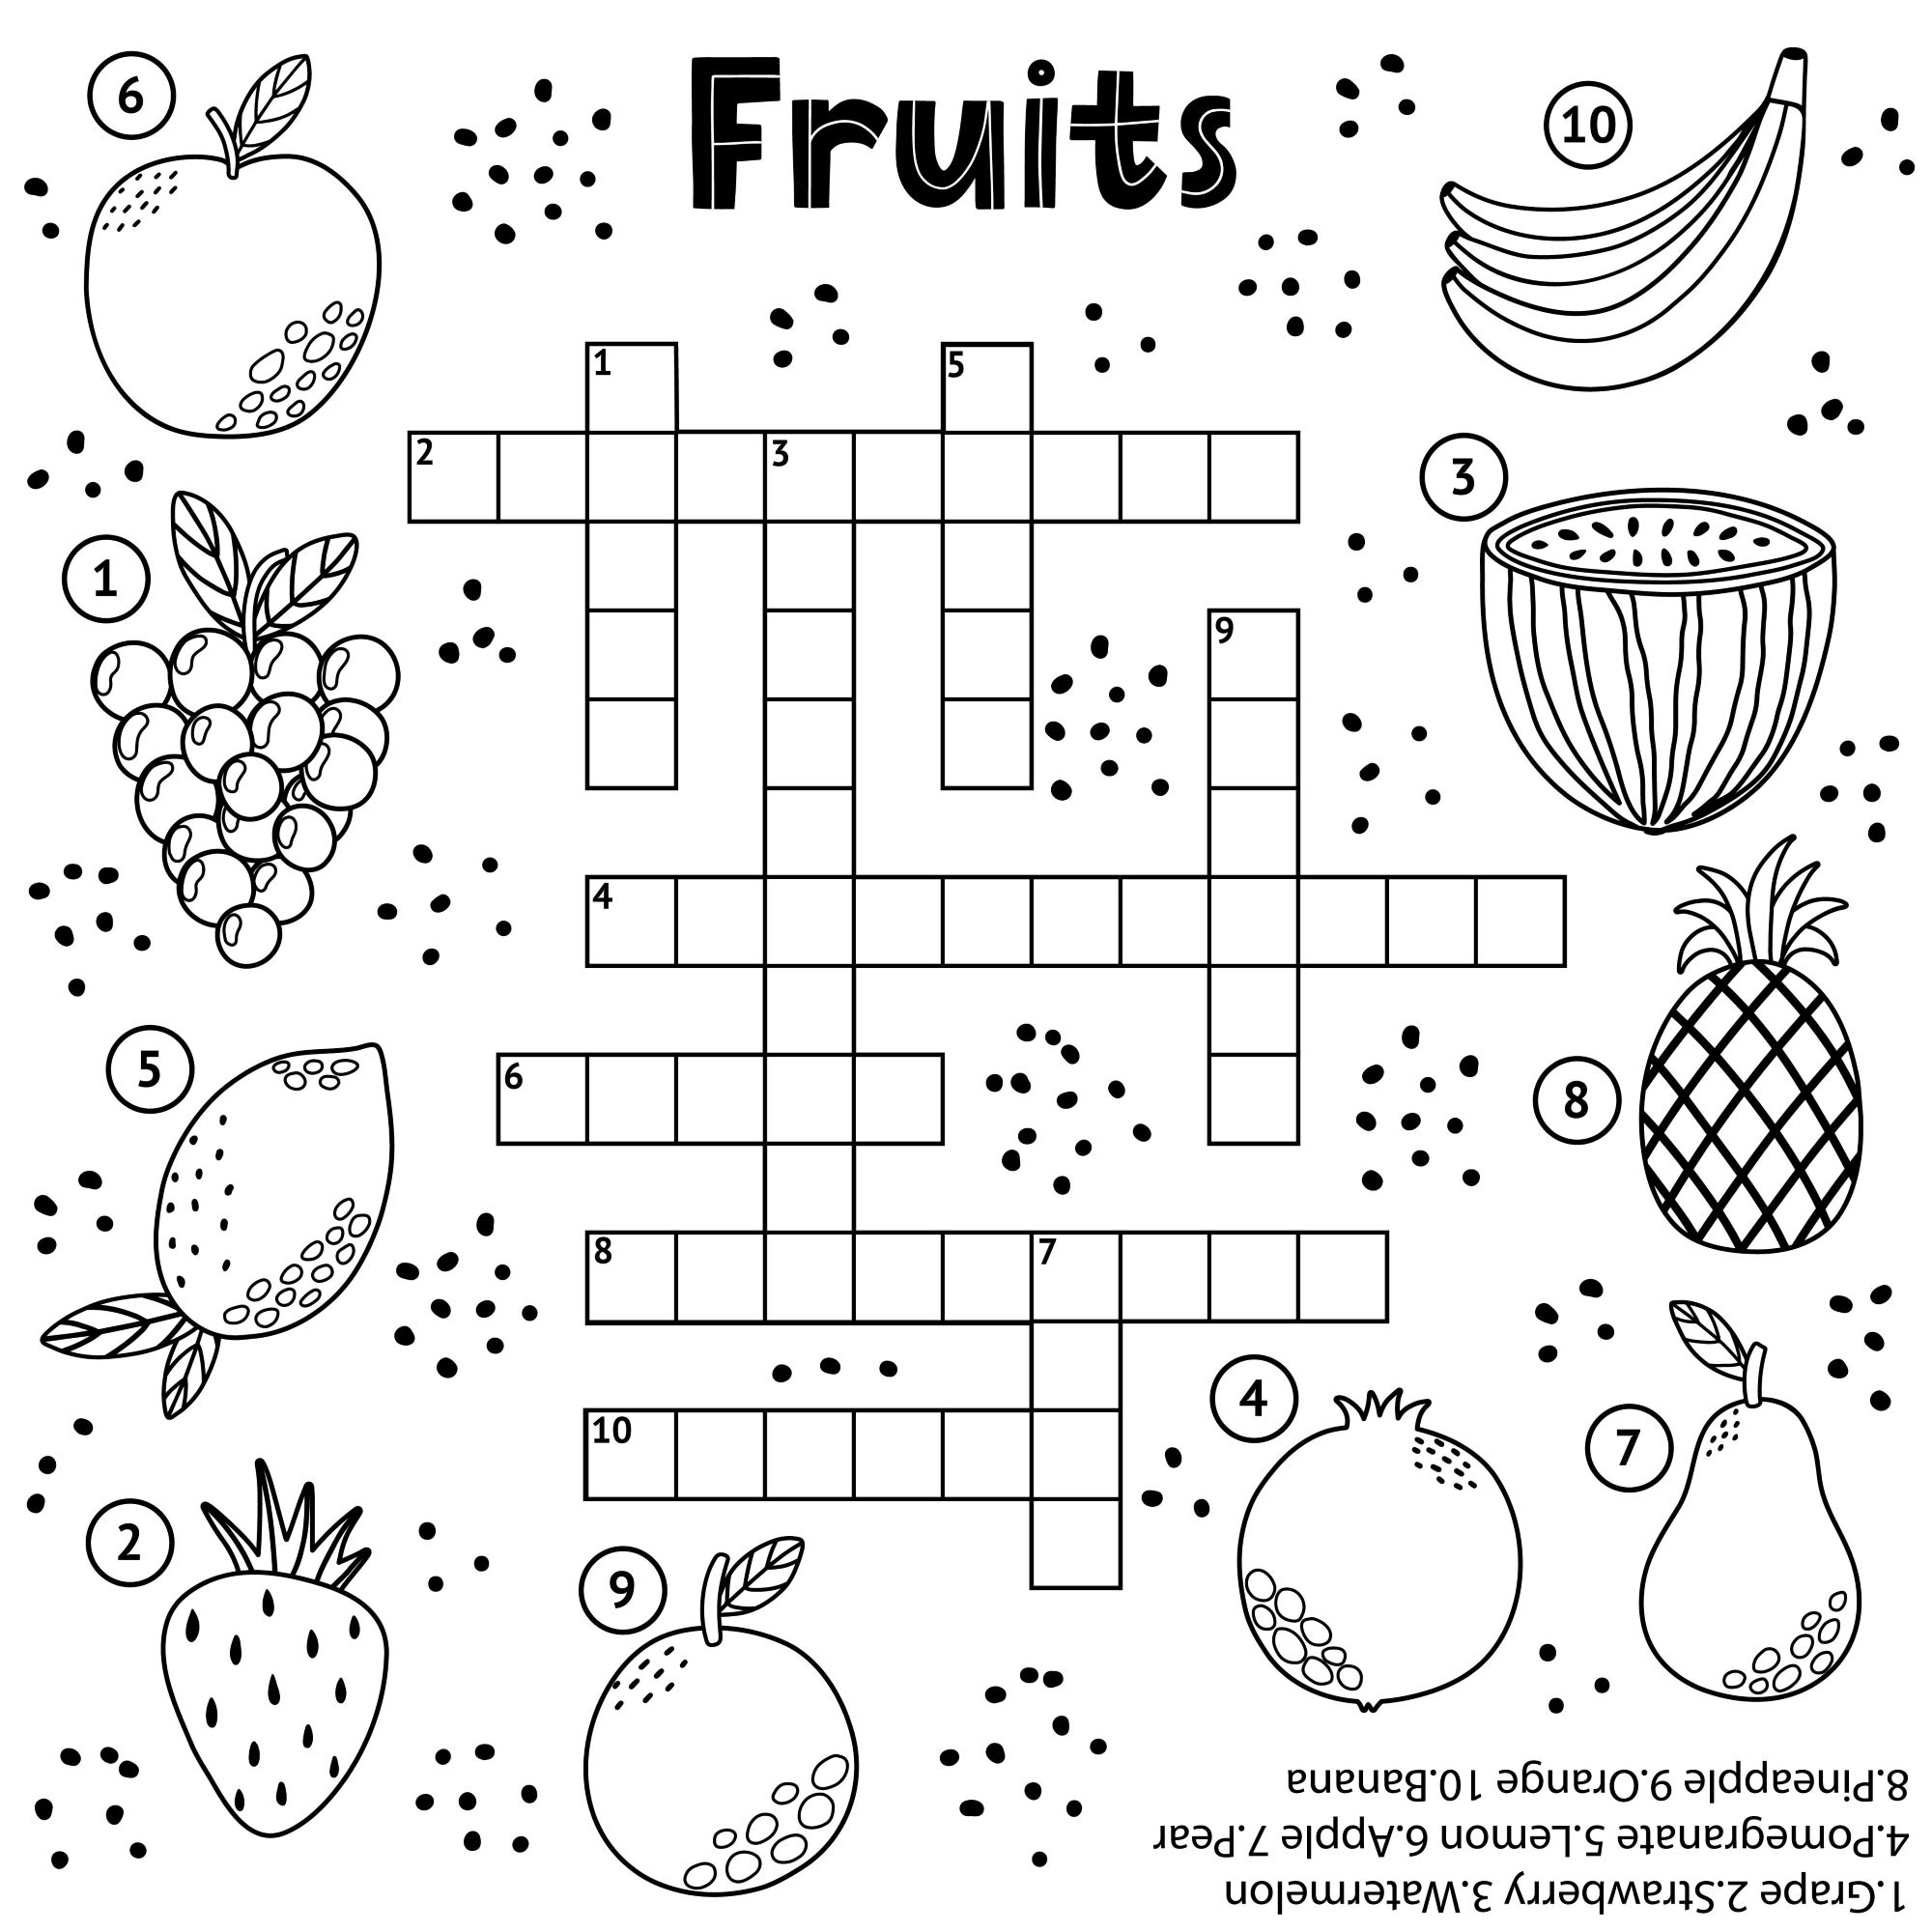 Printable Crossword Puzzle Books For Kids